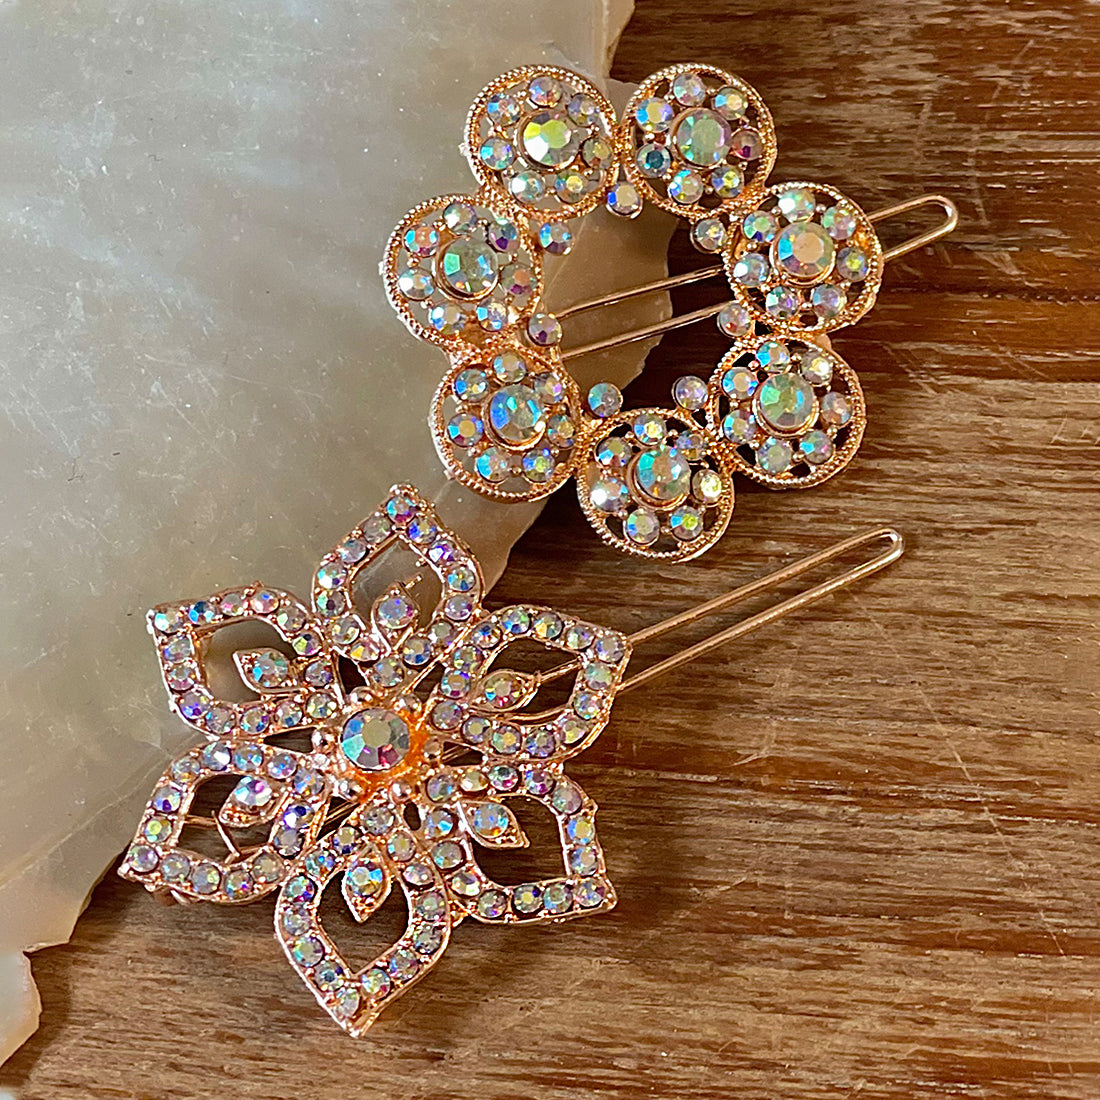 Sparkling Set Of 2 Rose Gold Flower Side Clips With Diamantes